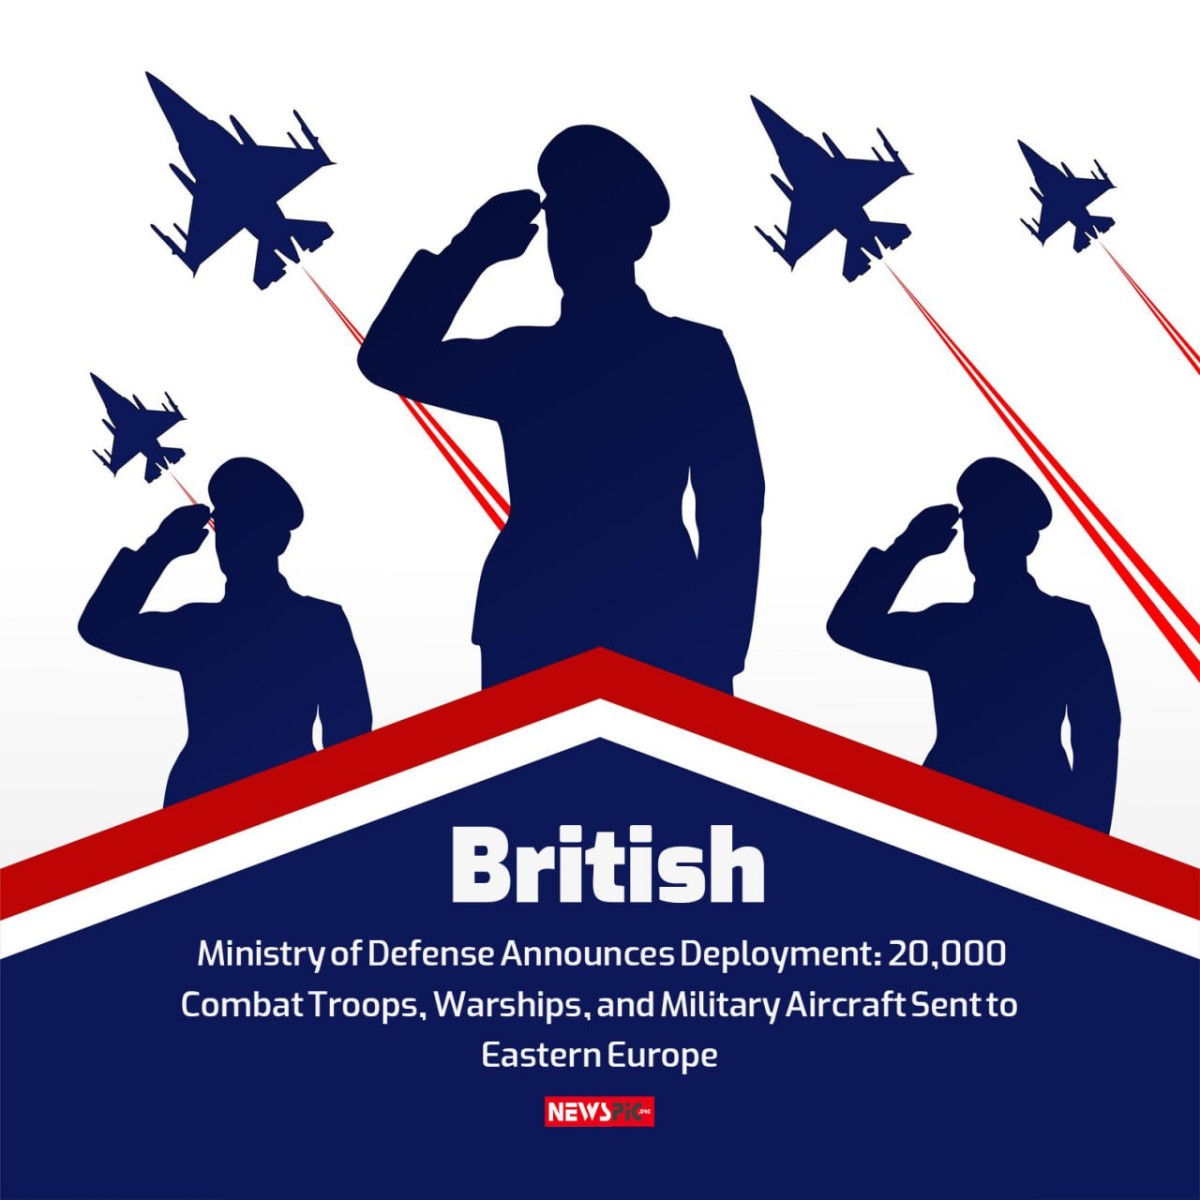 British Ministry of Defense Announces Deployment: 20,000 Combat Troops, Warships, and Military Aircraft Sent to Eastern Europe